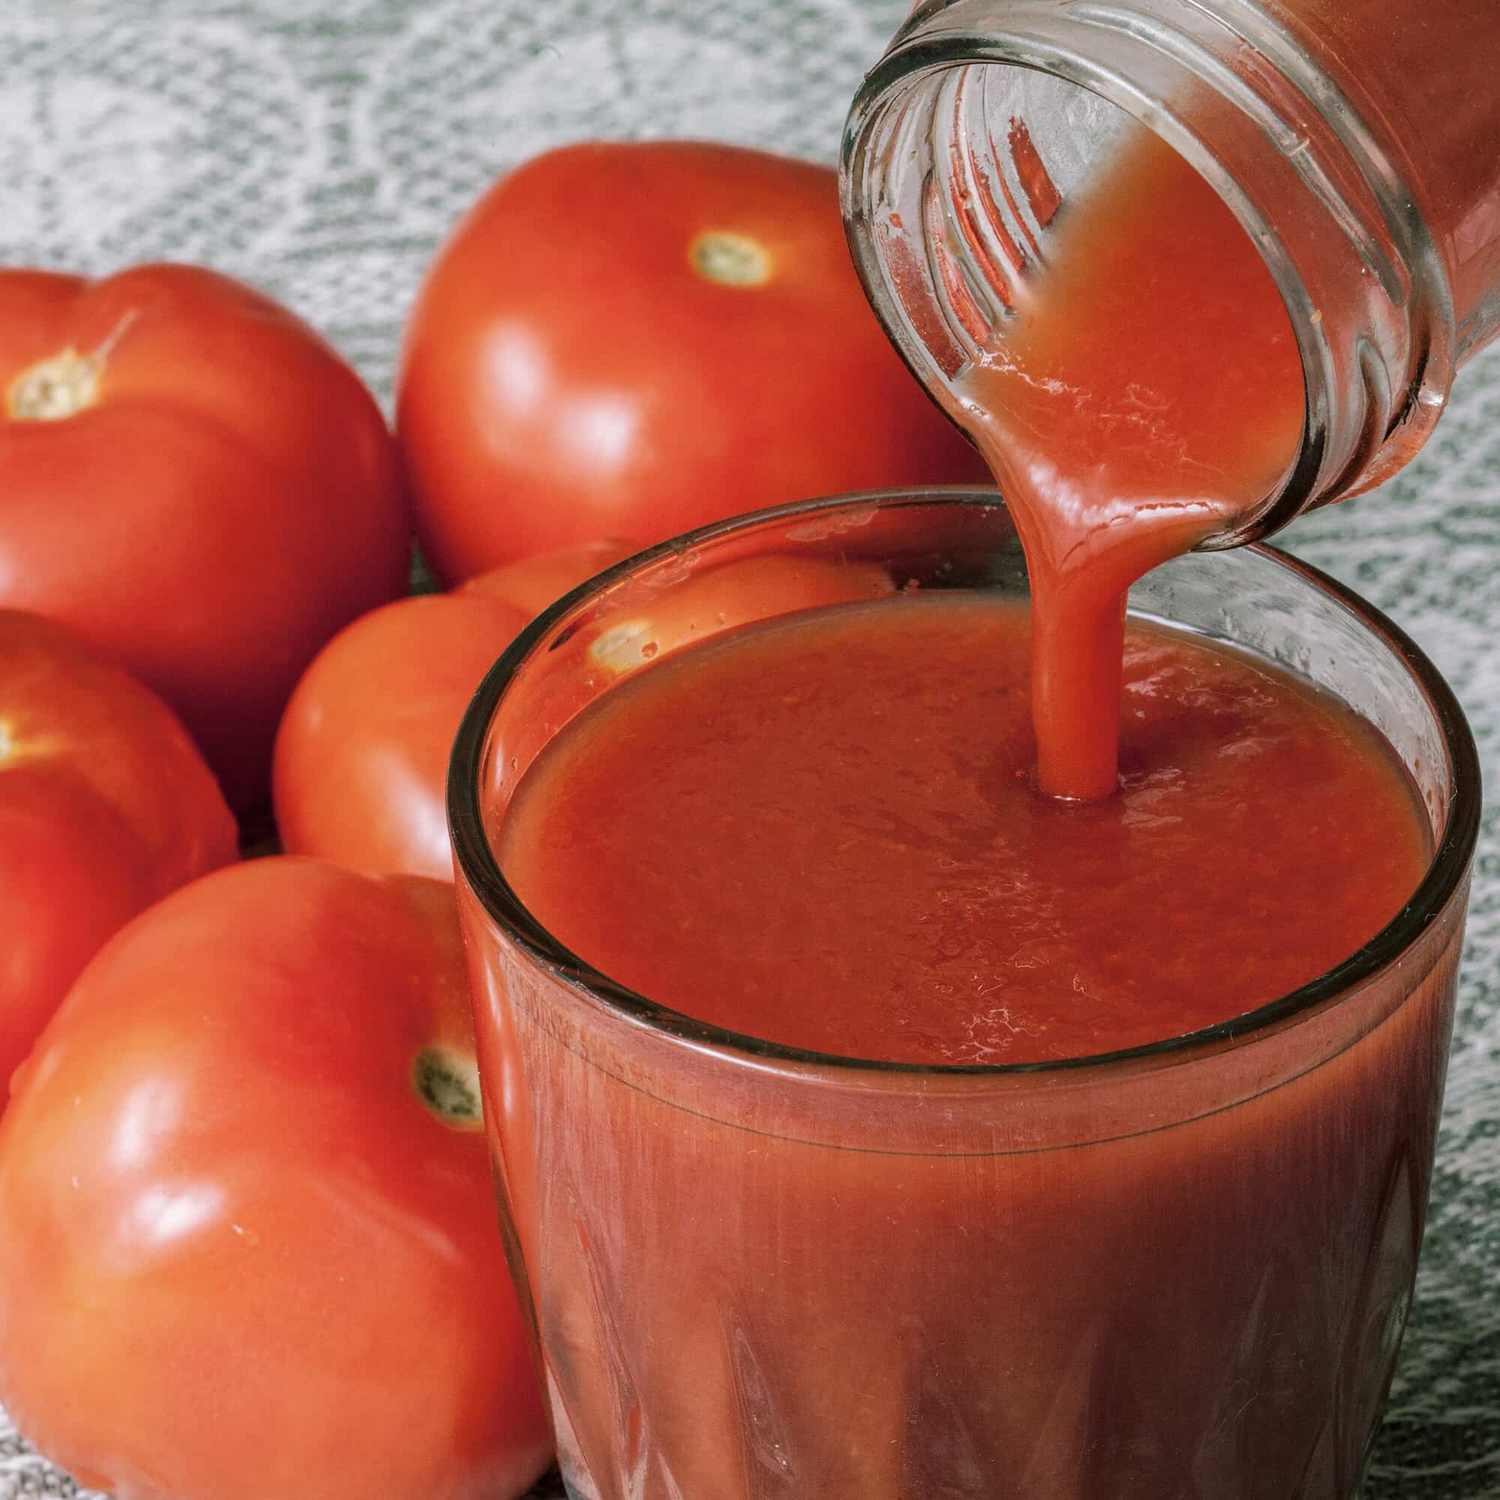 Tomato,Juice,With,Tomatoes,On,Background